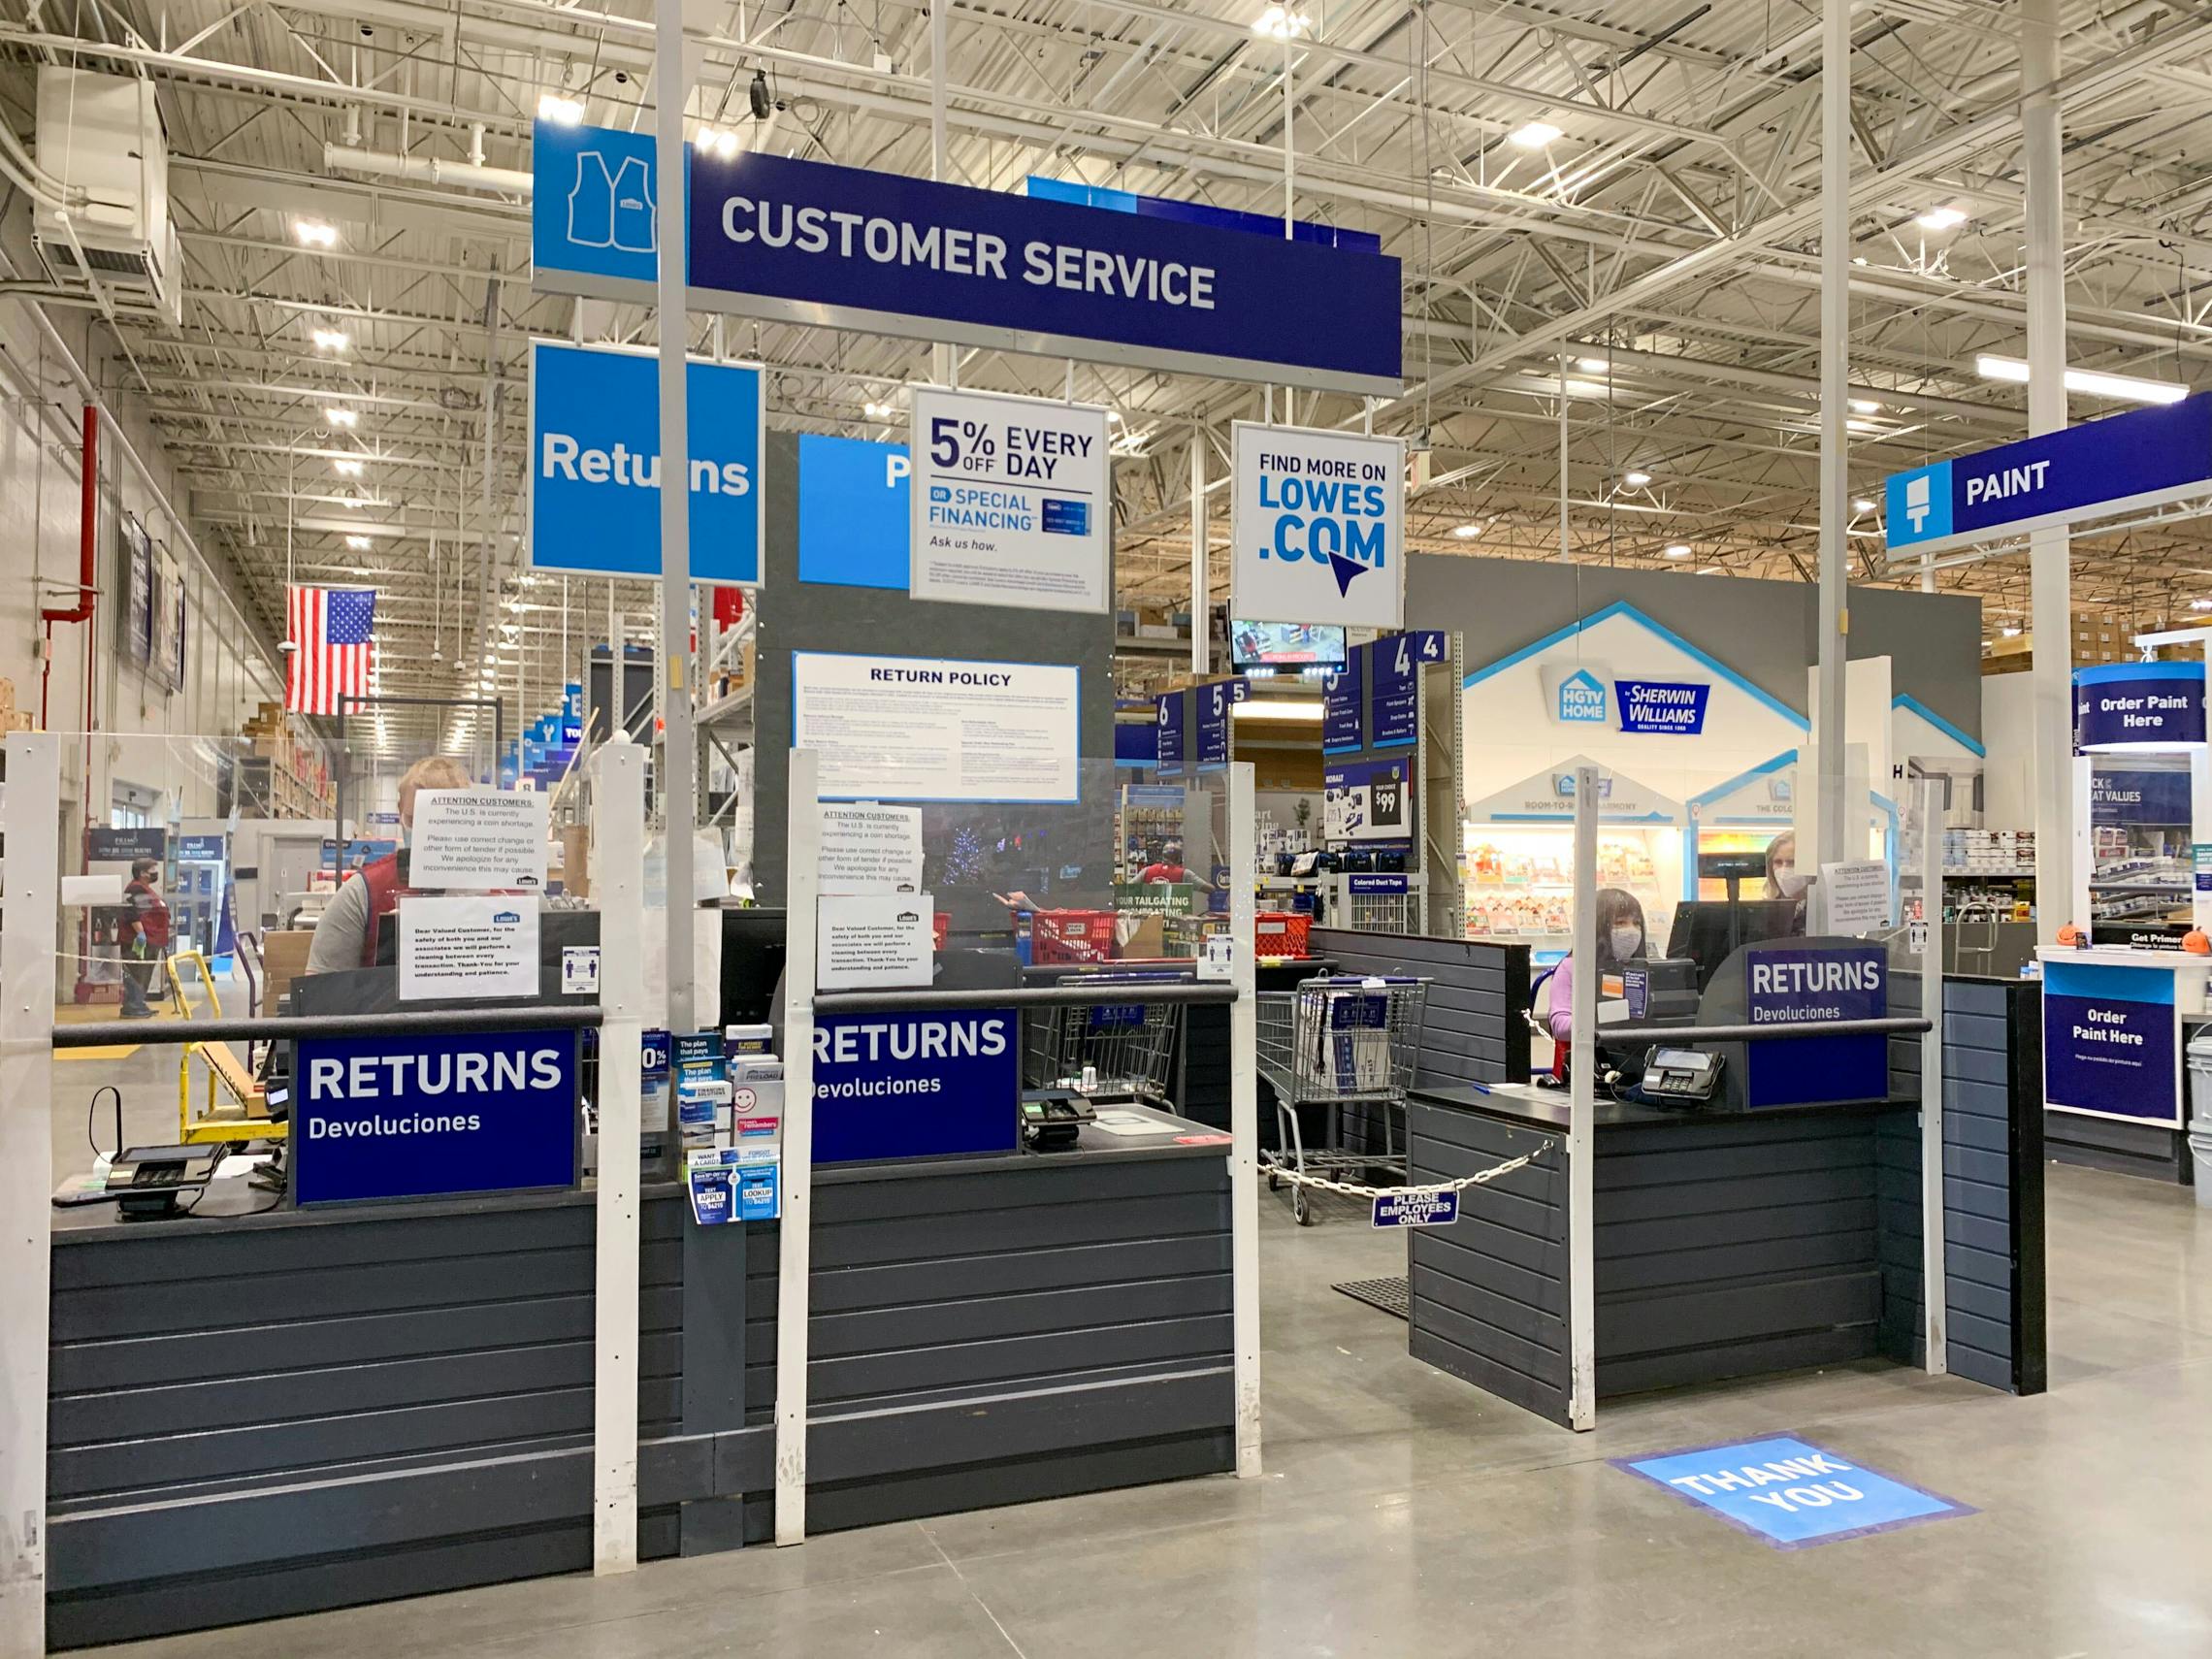 Lowe's Protection Plan (What's Covered, Lost Receipt + More)